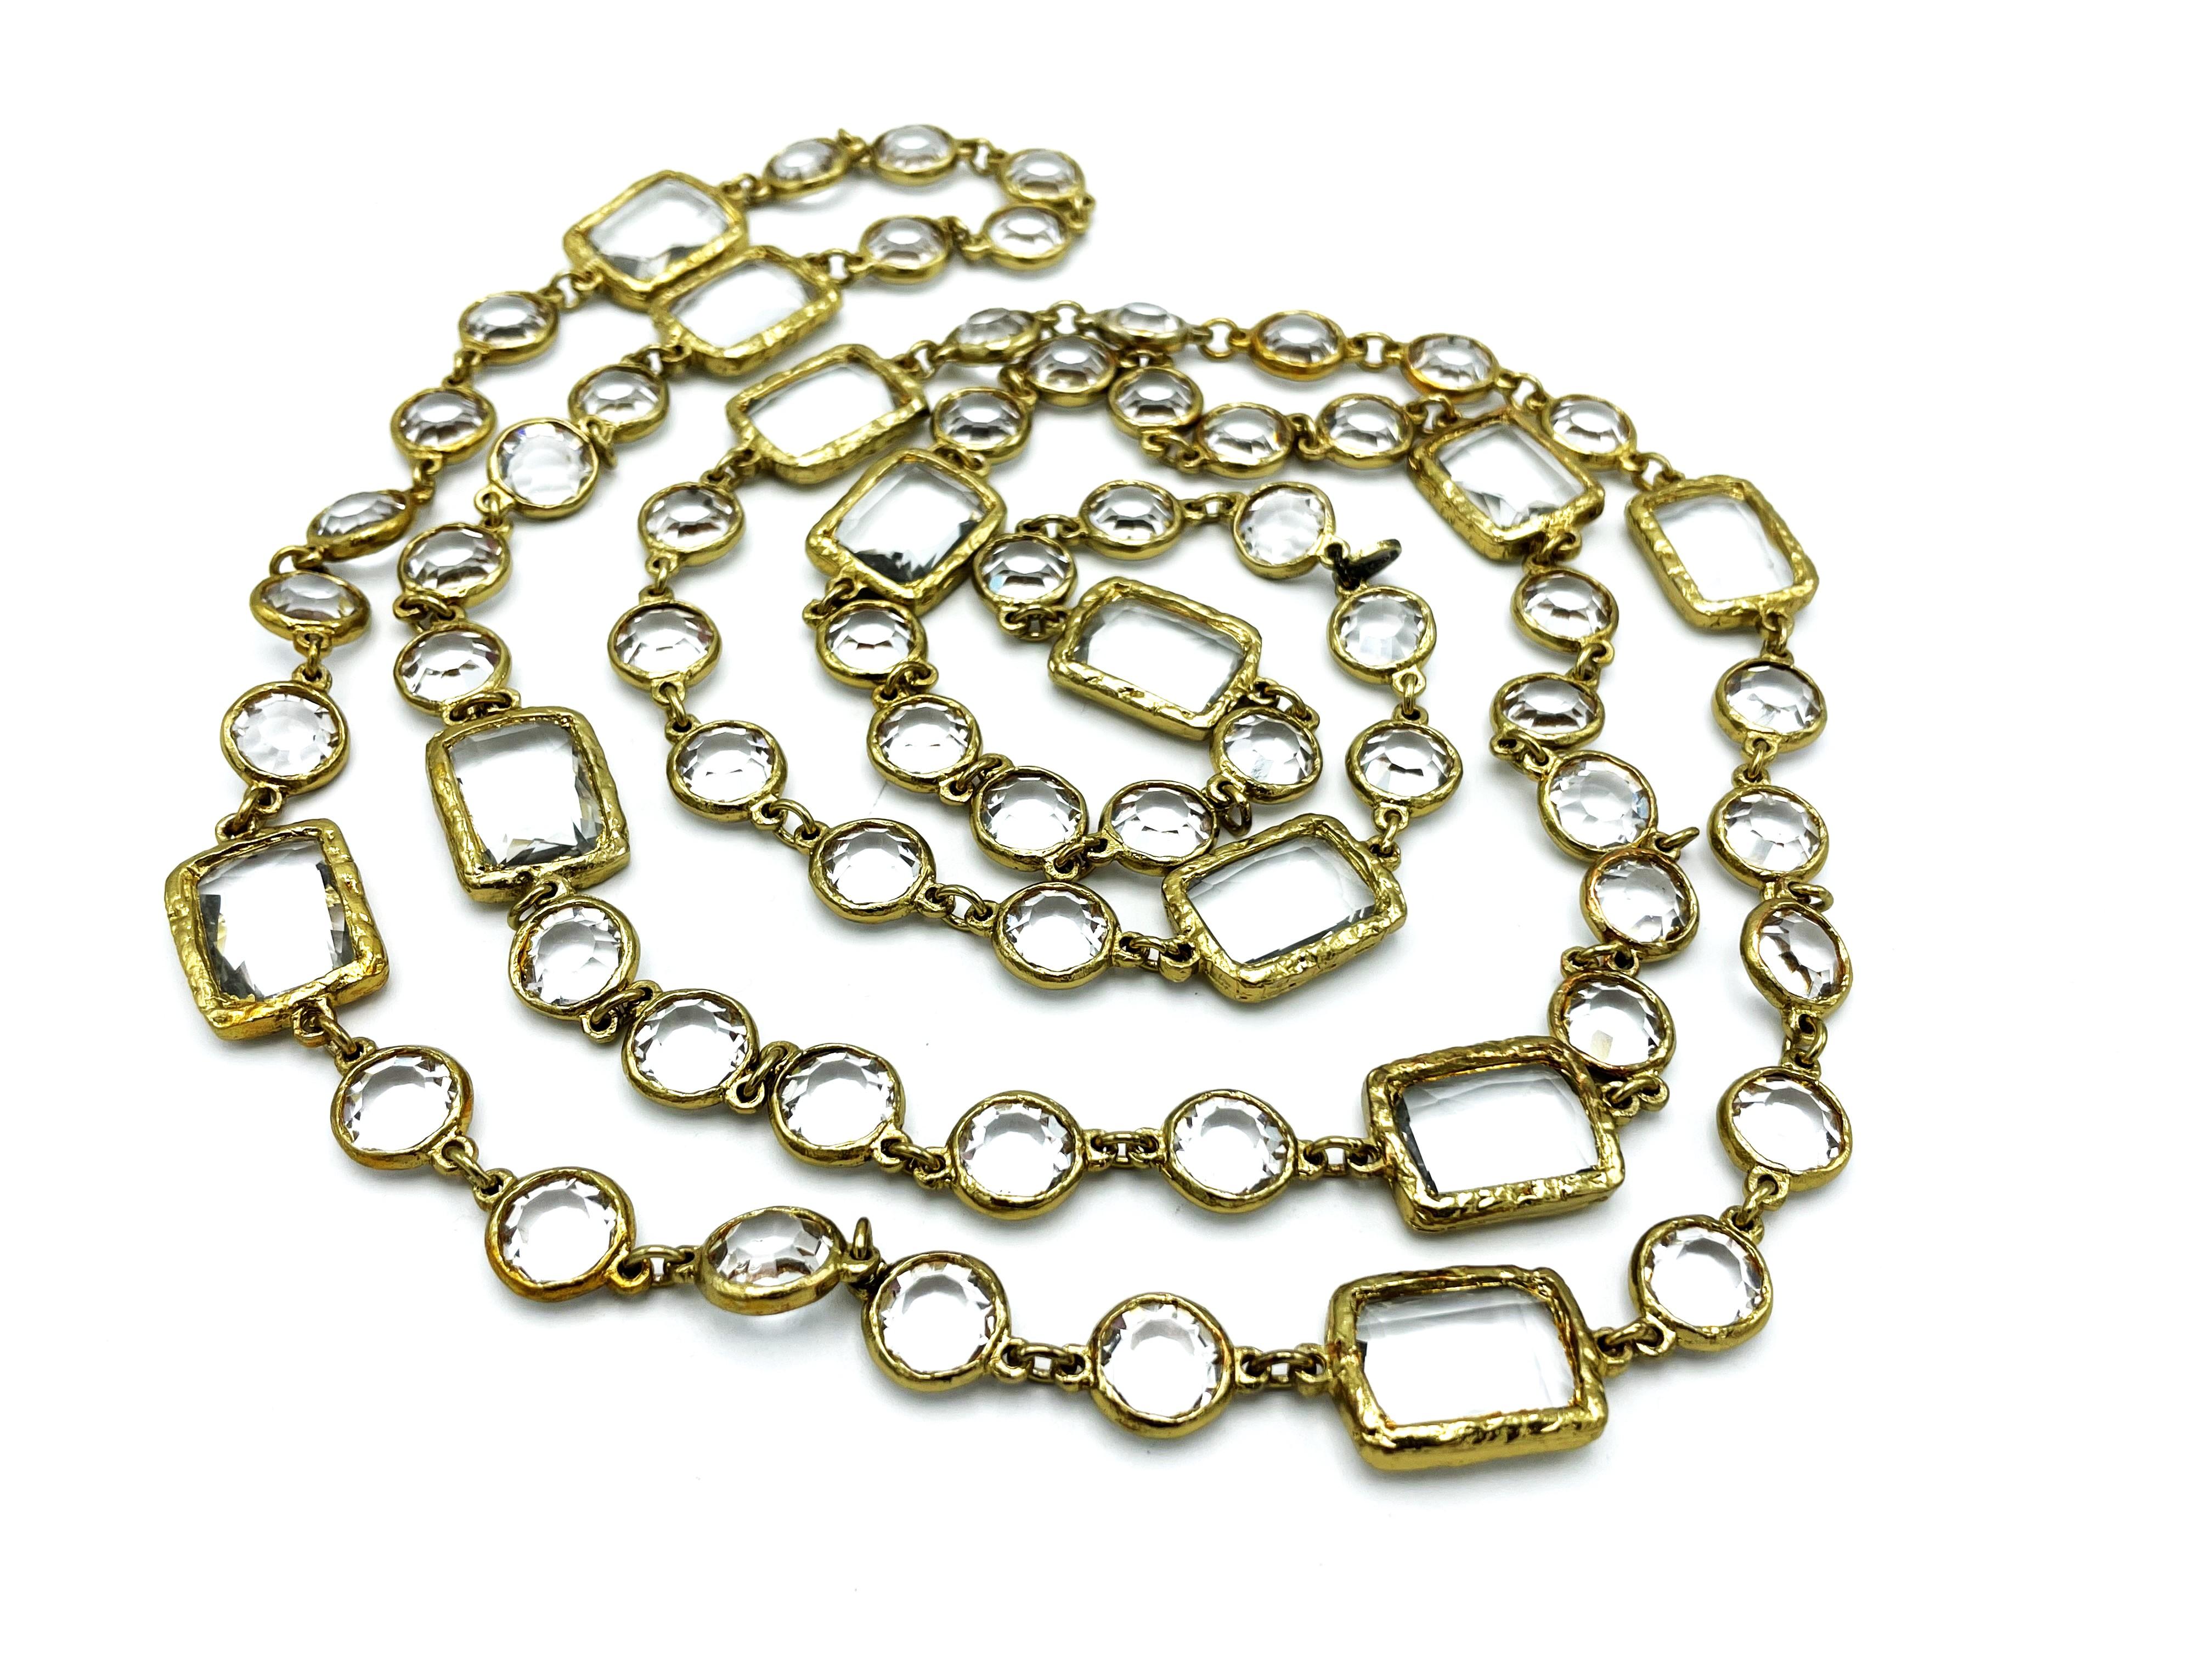 Modern Vintage CHANEL Necklace/Sautoir with 12 clear Chicklets, signed 1981, gold plate